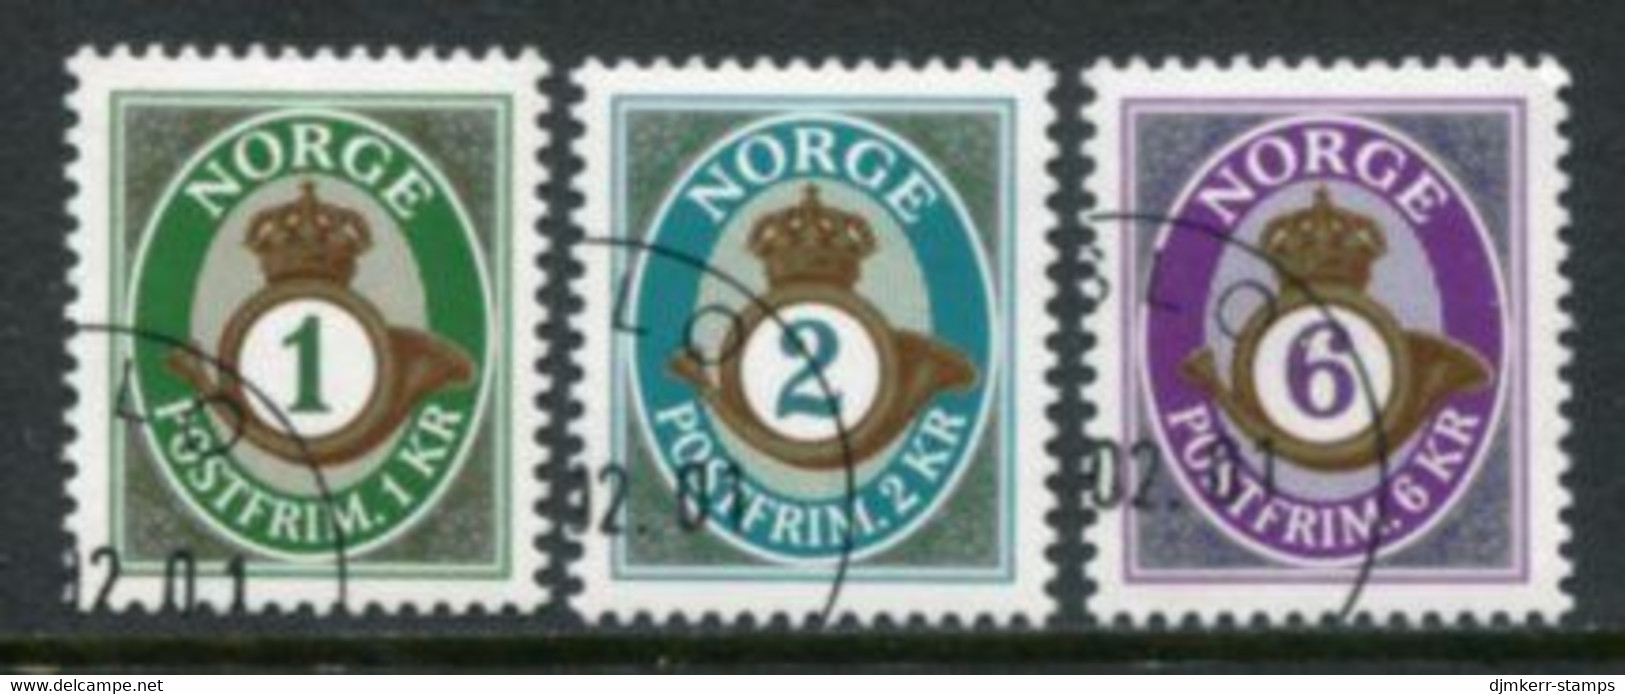 NORWAY 2001 Posthorn Definitive Used.  Michel 1380-82 - Usati